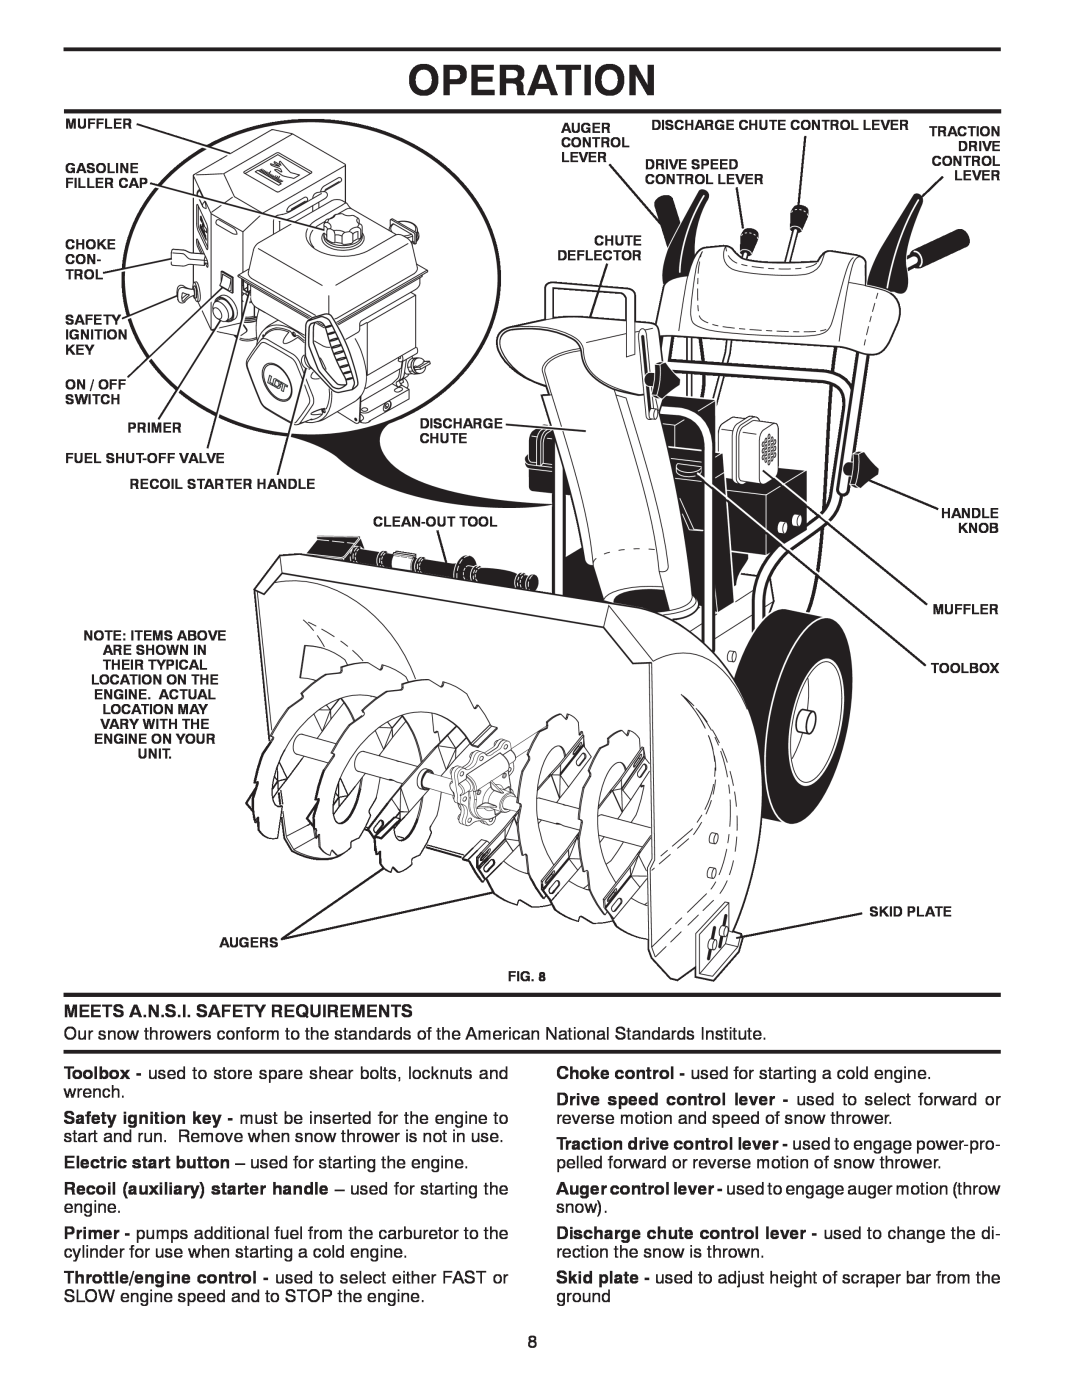 Poulan 421888 owner manual Operation, Meets A.N.S.I. Safety Requirements 